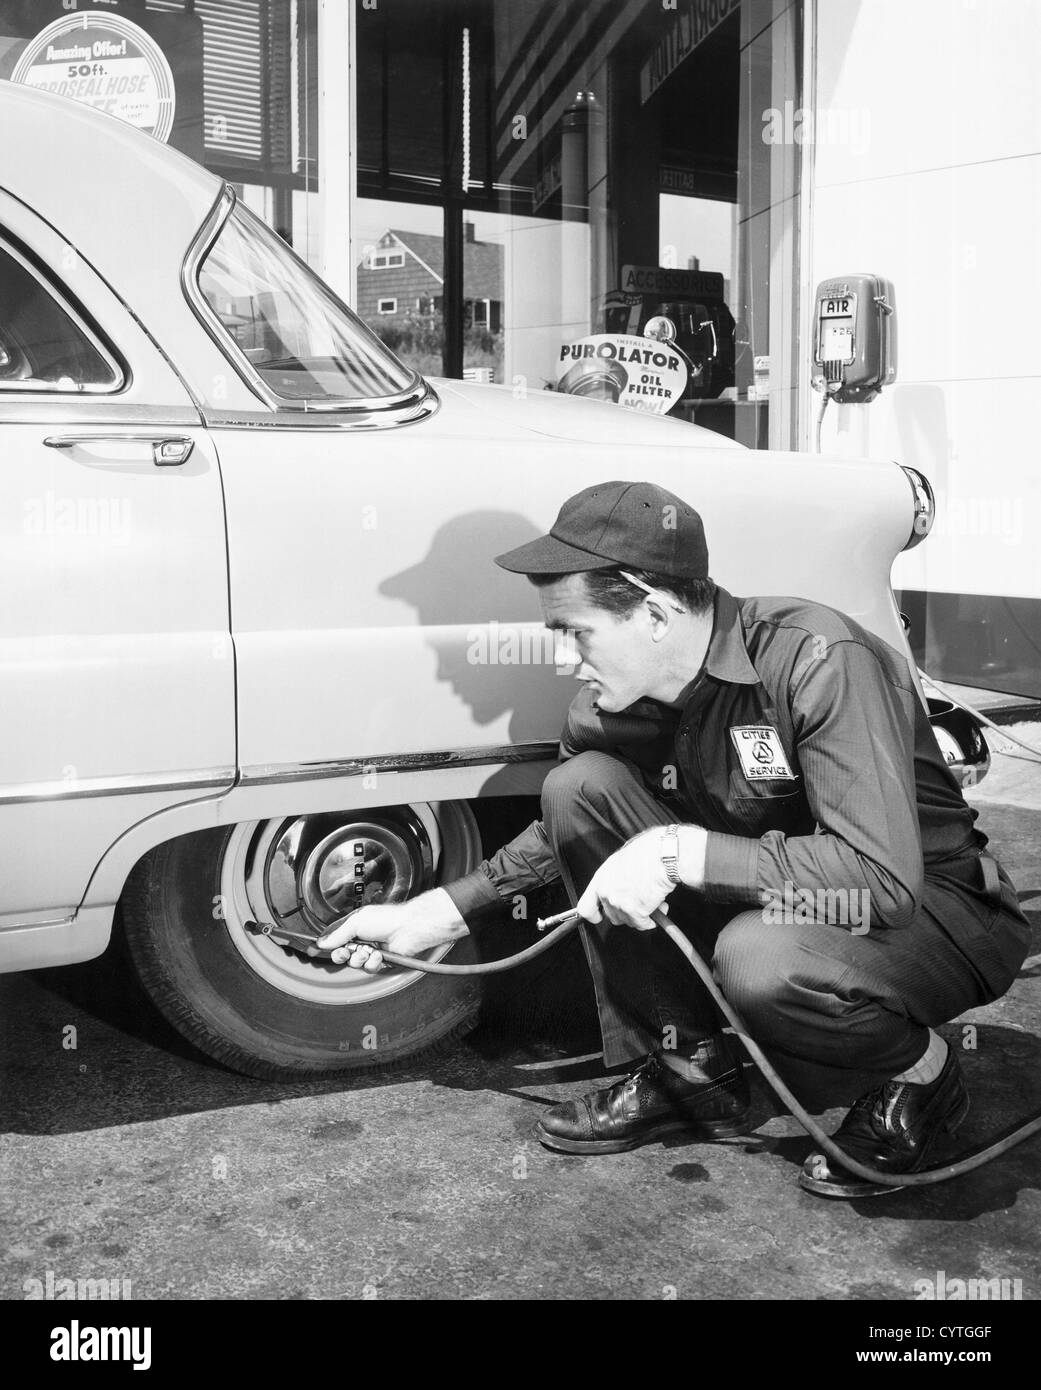 Service man replacing air in car tire Stock Photo